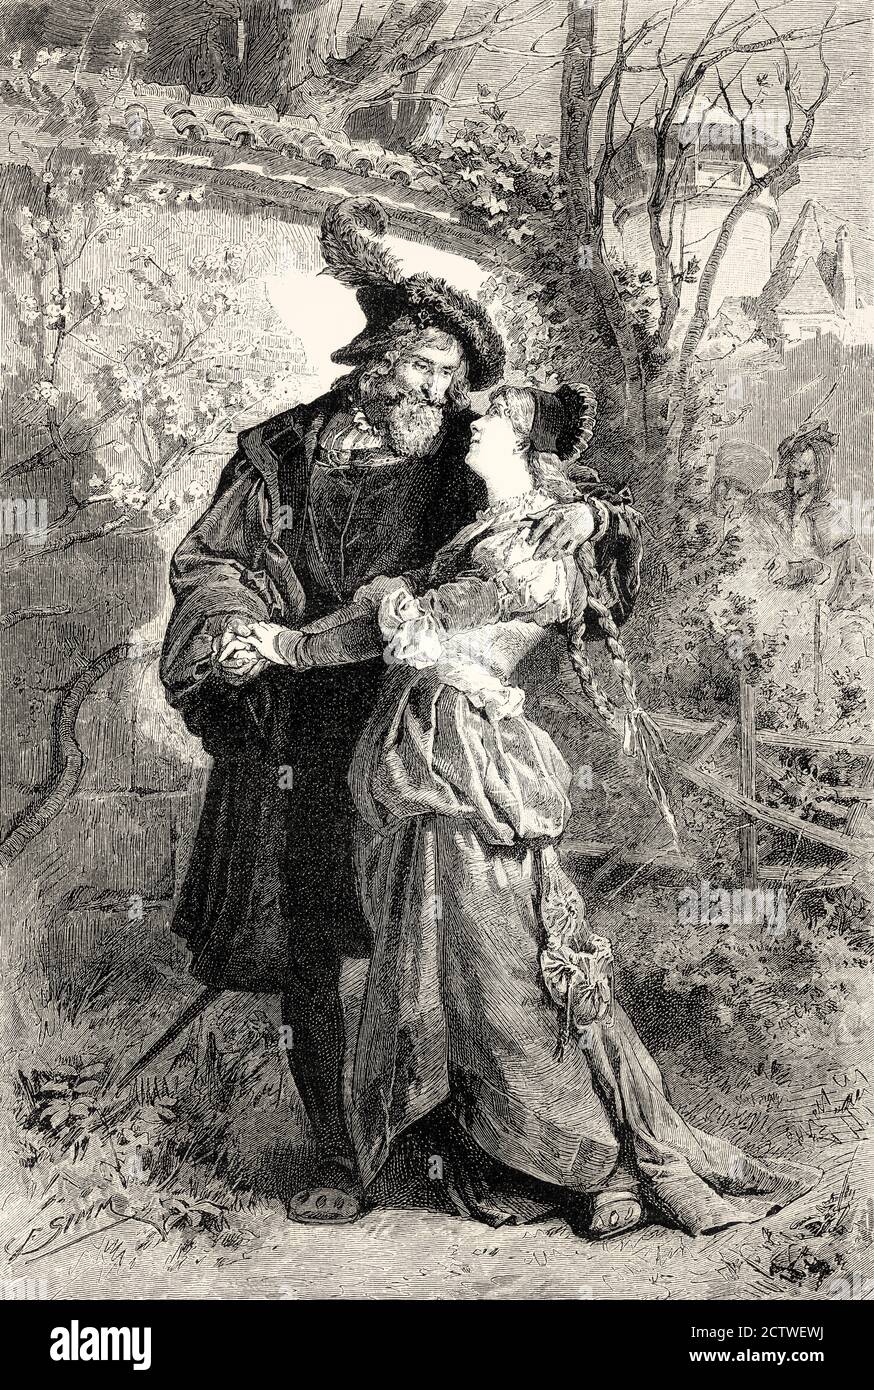 Gretchen confesses her love to Faust, first part of the tragic play Faust by Johann Wolfgang von Goethe Stock Photo